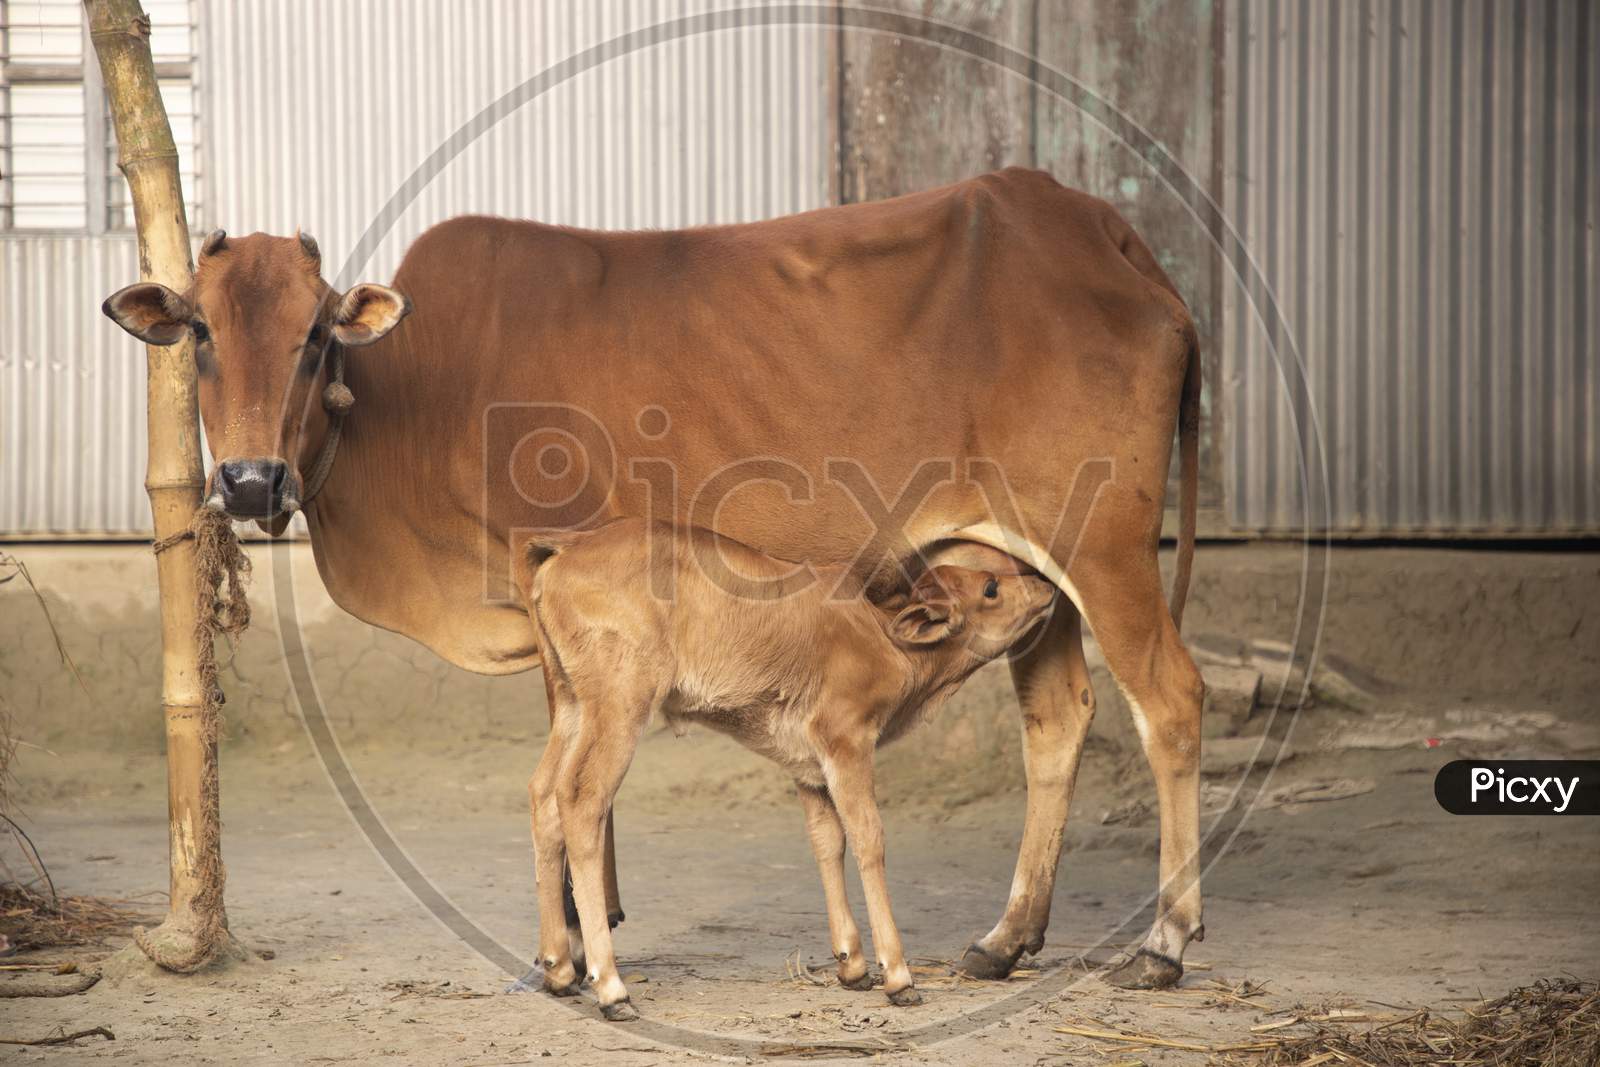 Calf feeding milk from her mother